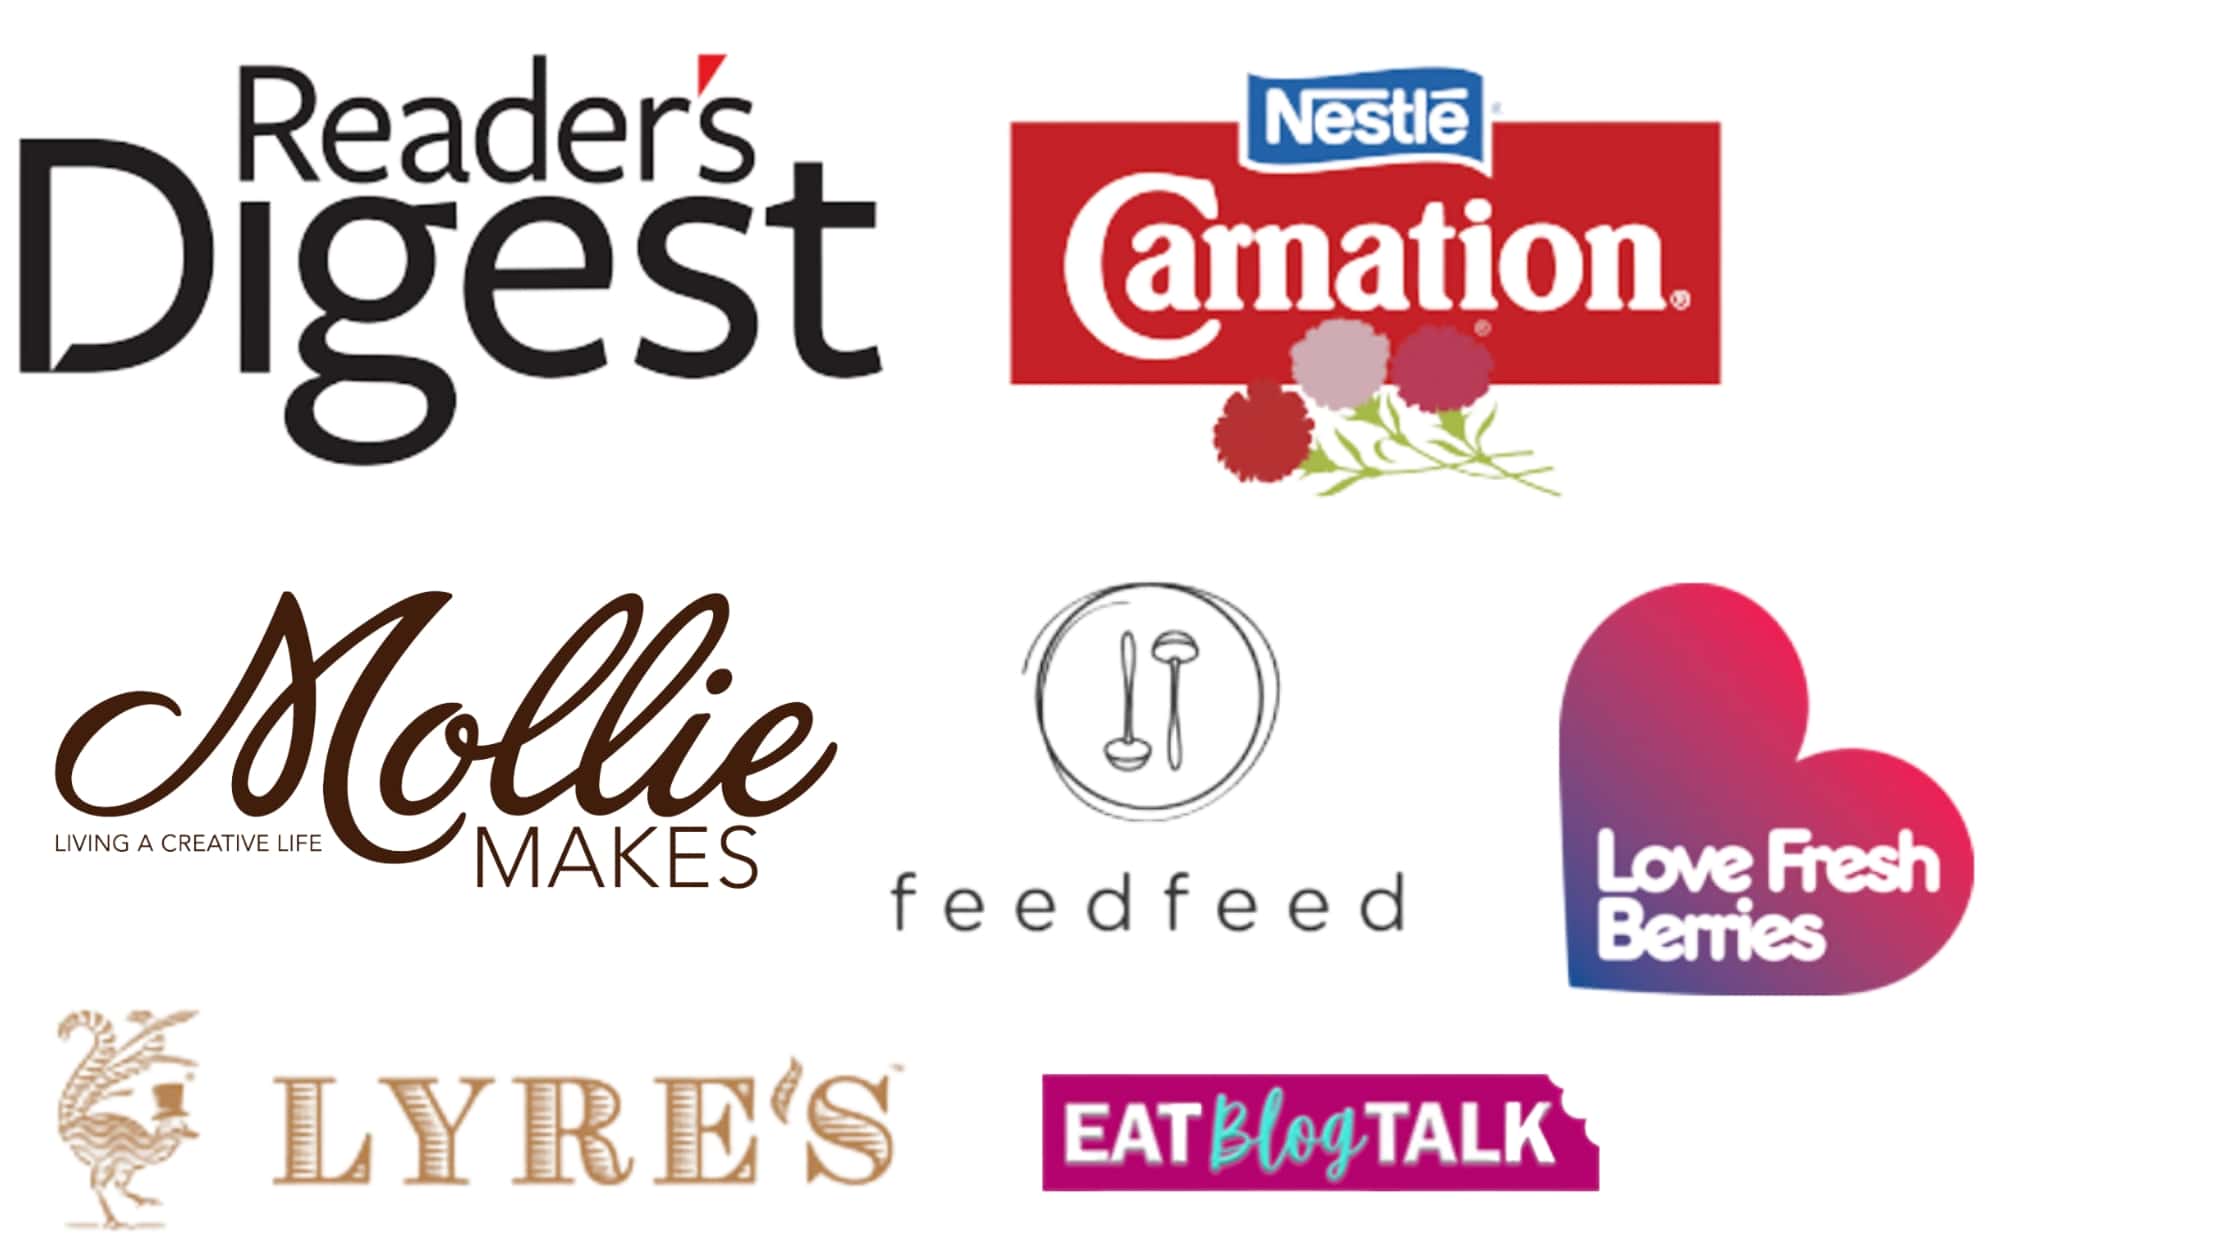 Logos for Reader's Digest, Carnation, Mollie Makes, the FeedFeed, love fresh berries, Lyre's and Eat Blog Talk